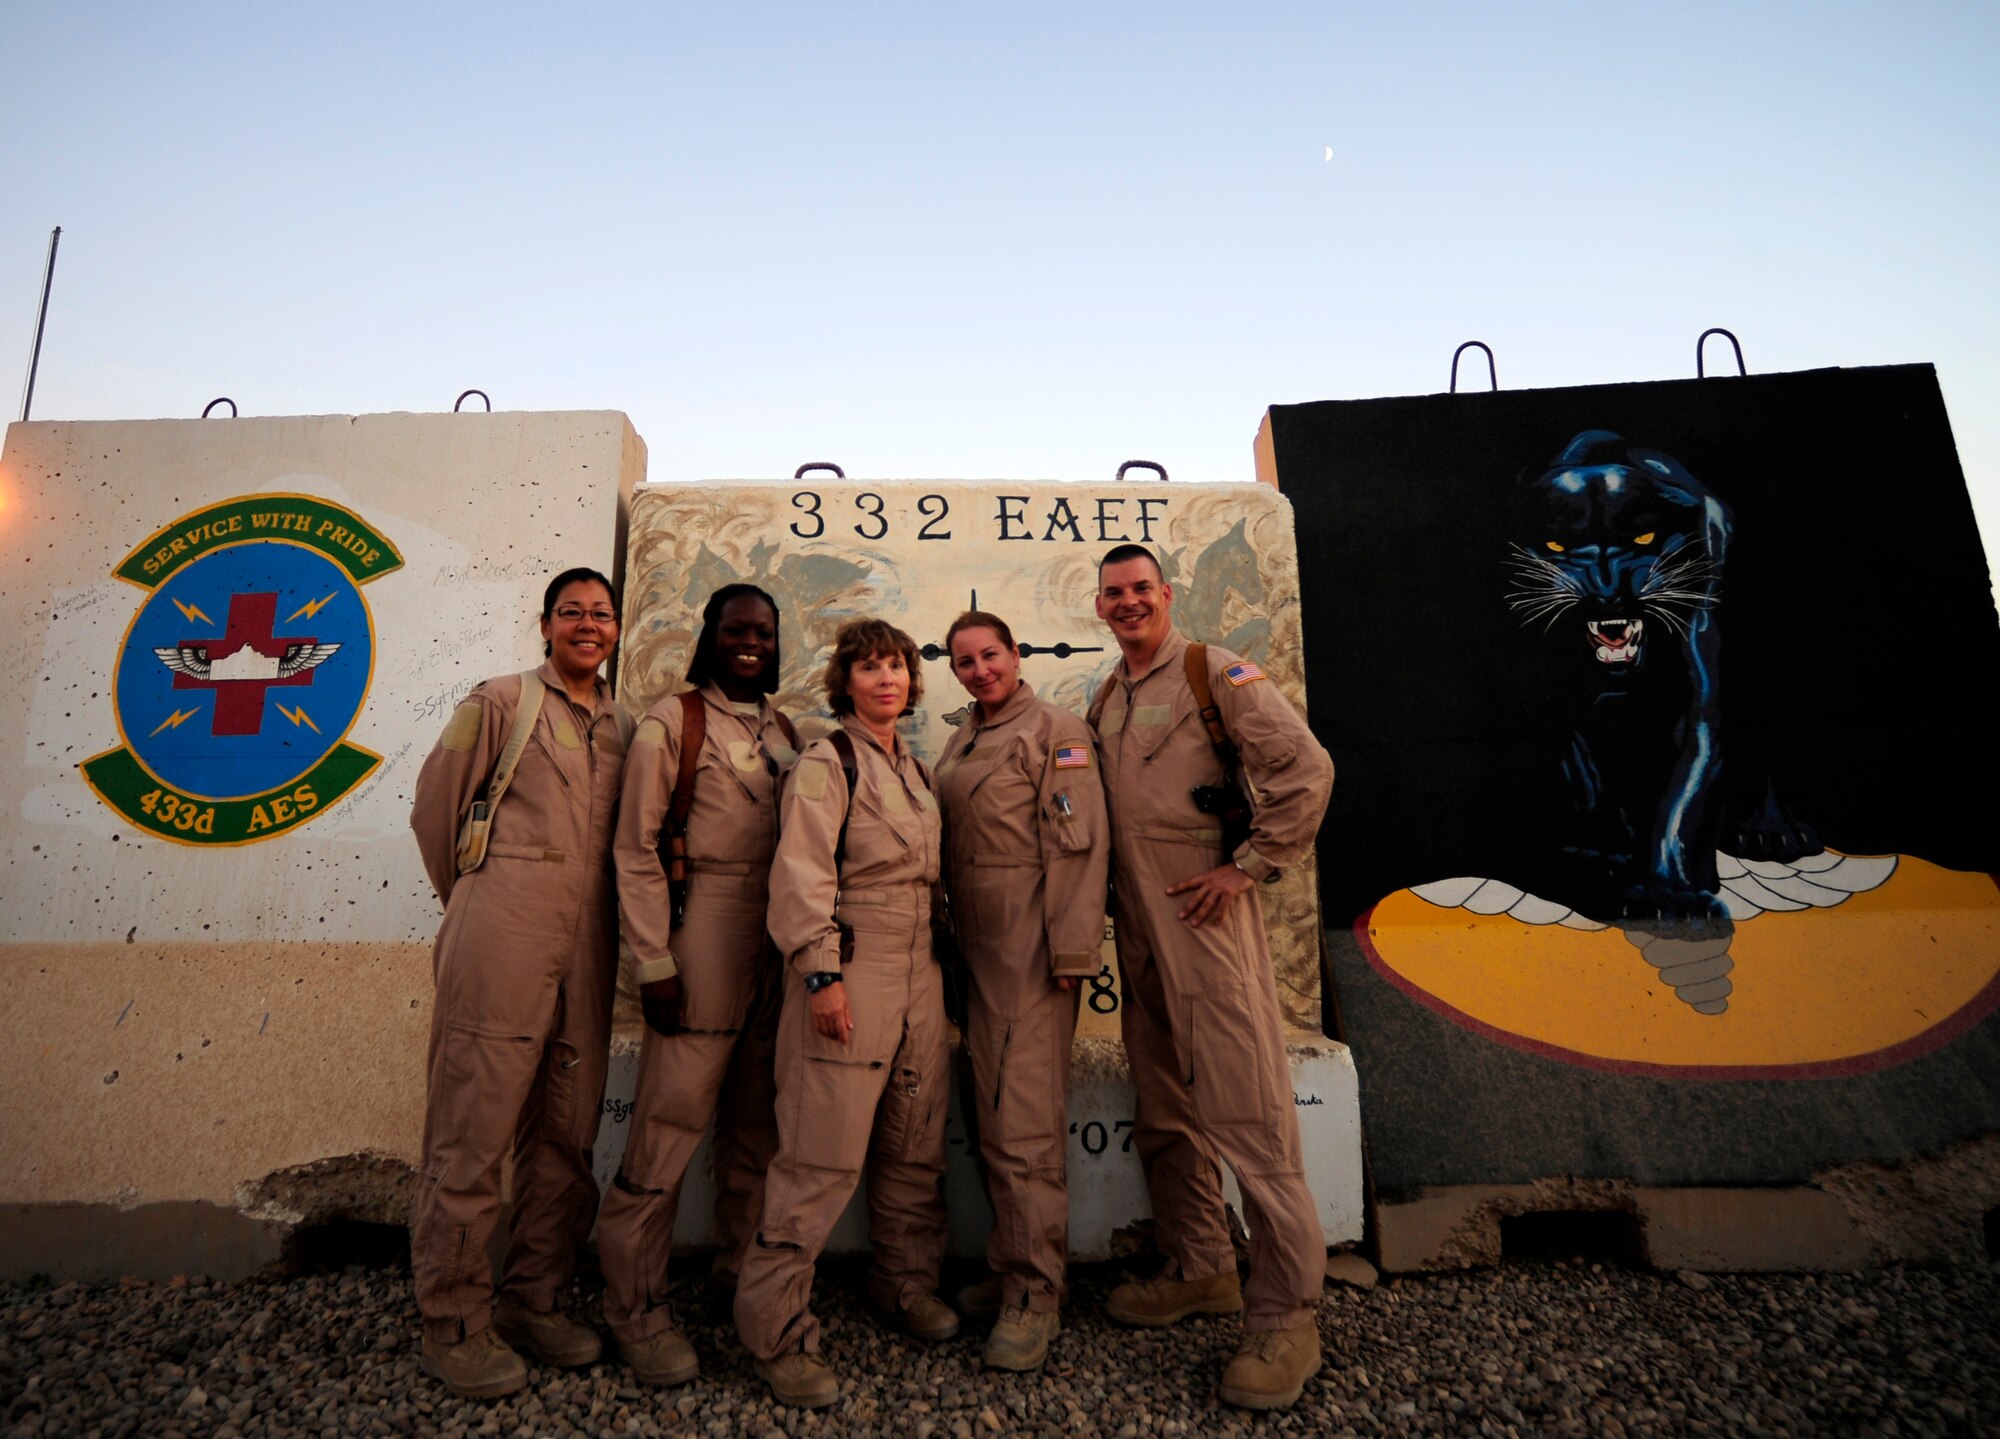 U.S. Air Force 362nd Expeditionary Aeromedical Evacuation Flight, poses for the camera after their crew brief prior to aeromedical evacuation mission at Joint Base Balad, Iraq on July 17, 2010. 
Left to right: Lisa Mayo, Nicole Caldwell, Marty Maddox, Margerite Hellwich and Tony Staut.
(U.S. Air Force photo by Staff Sgt. Andy M. Kin / Released)